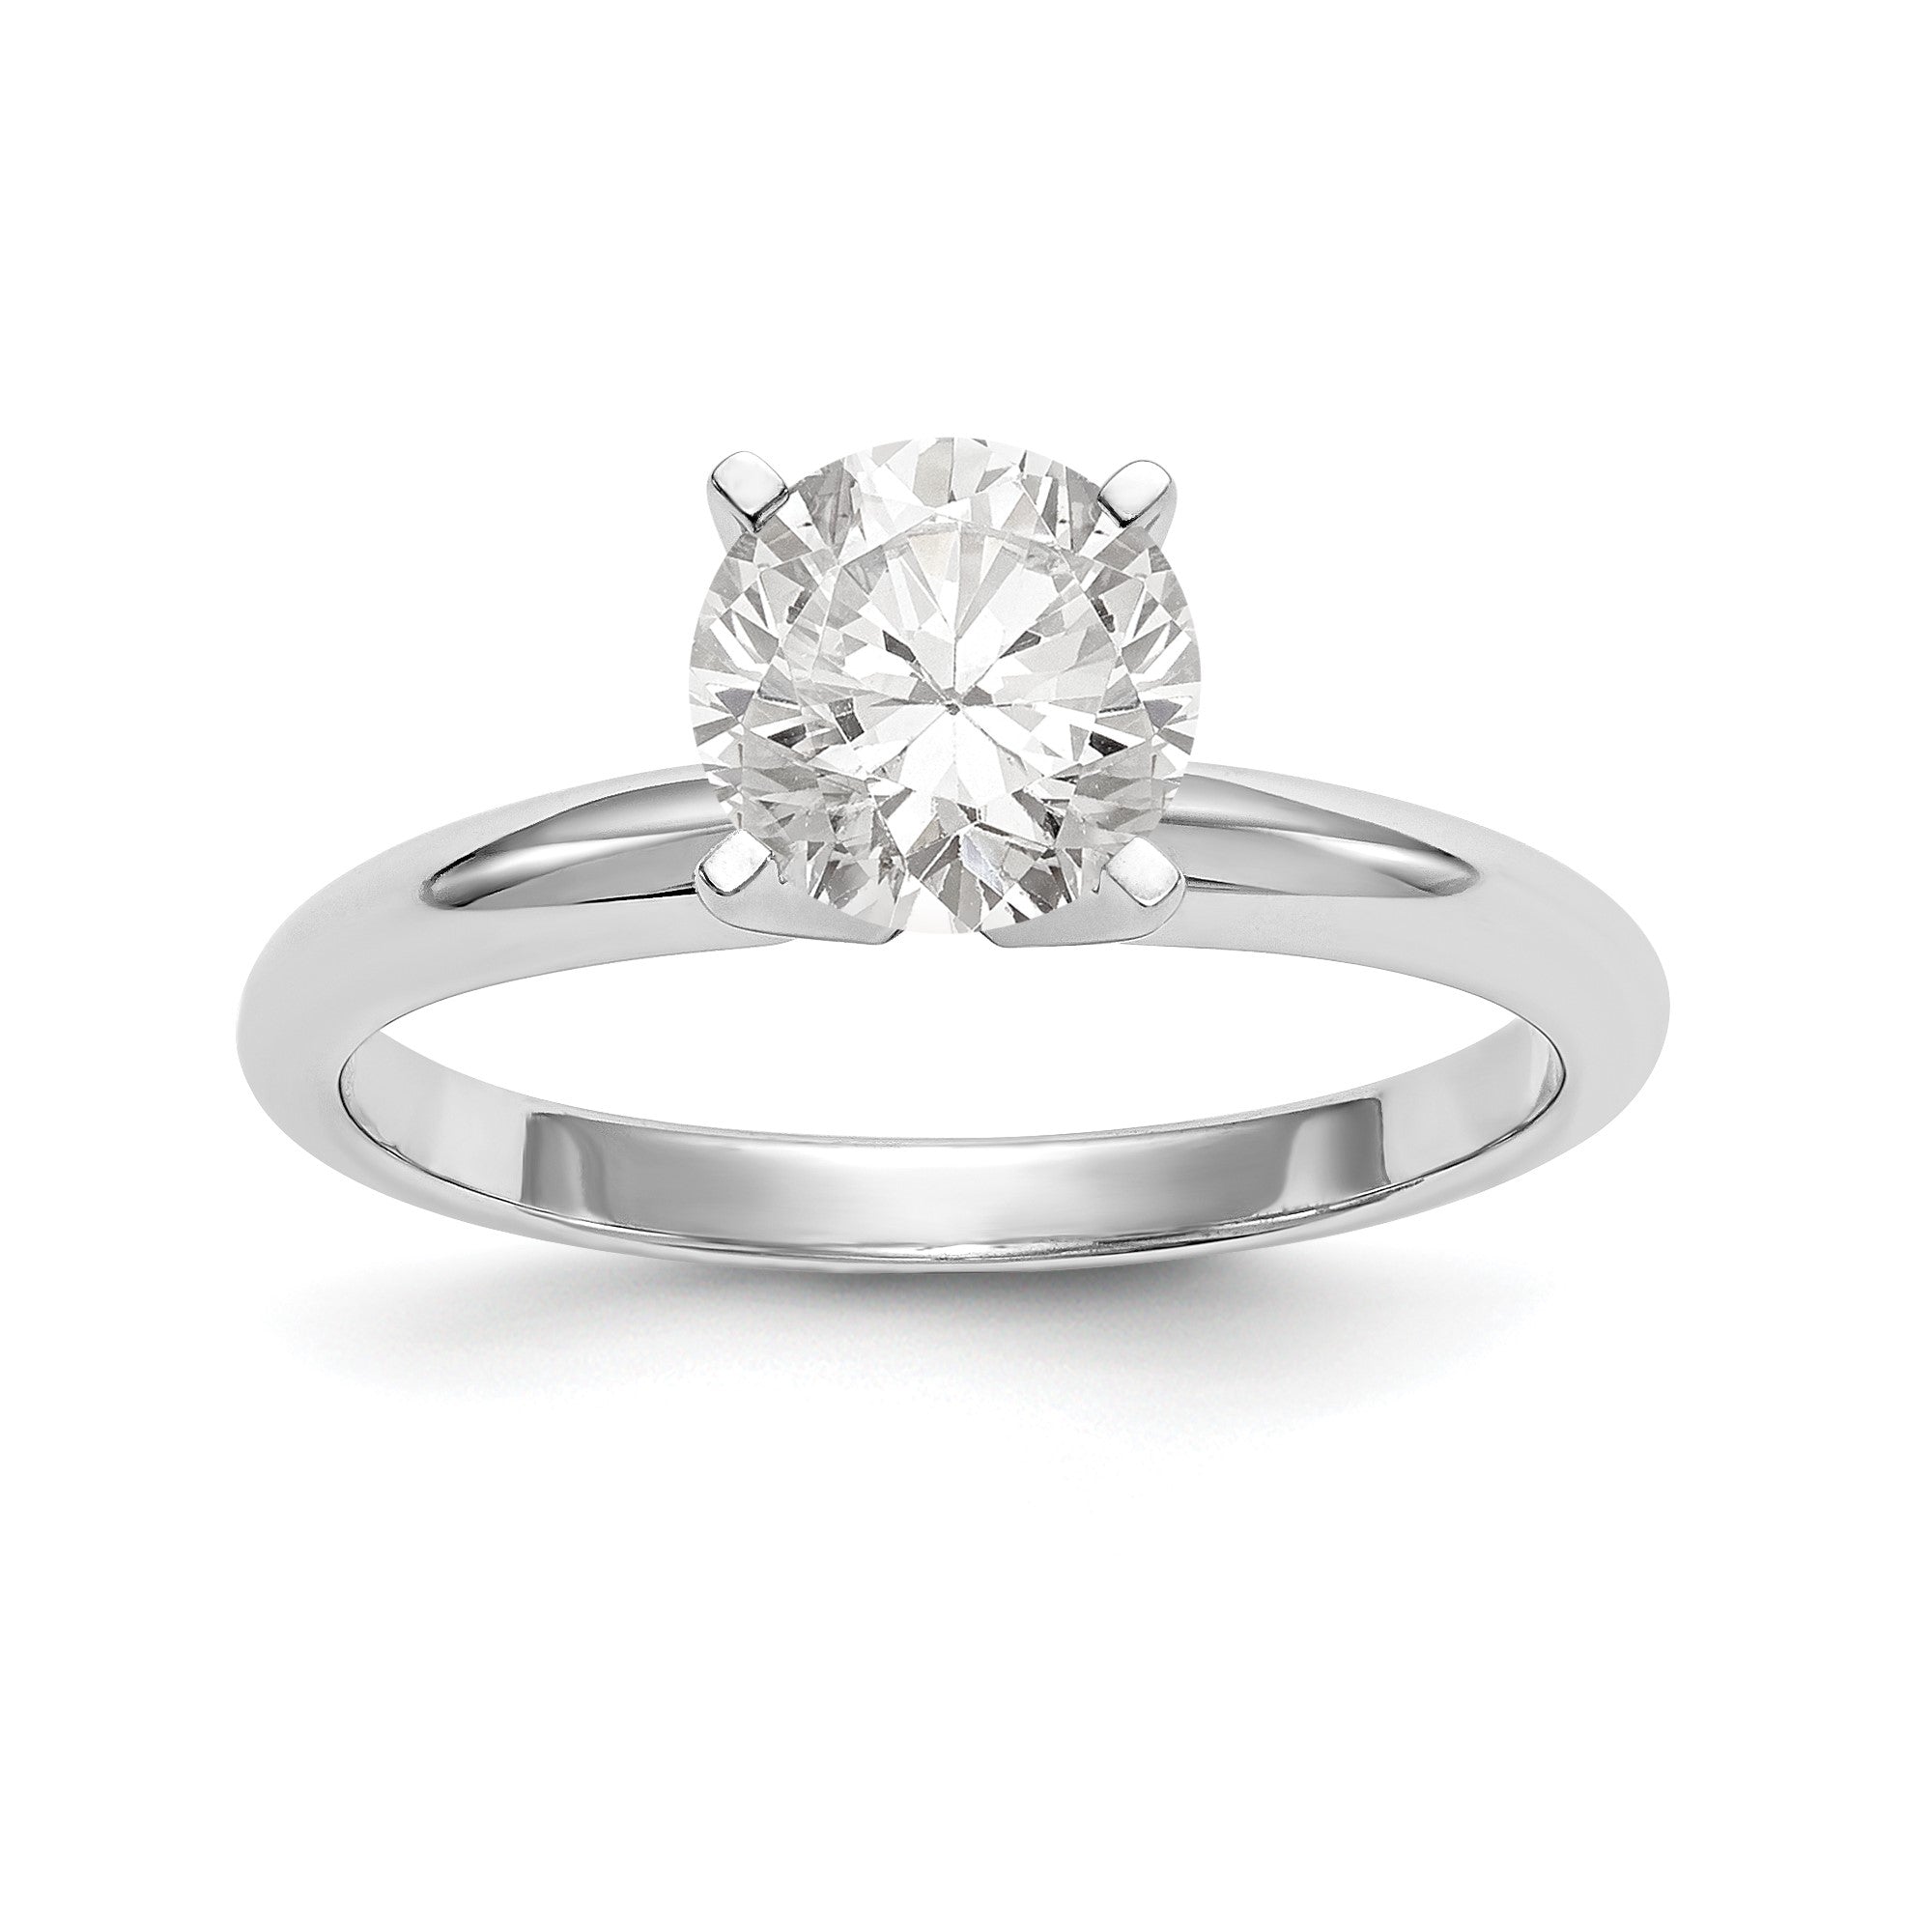 Image of ID 1 Natural Diamond Knife Edge Style Four Prong Solitaire Engagement Ring in 14K White Gold